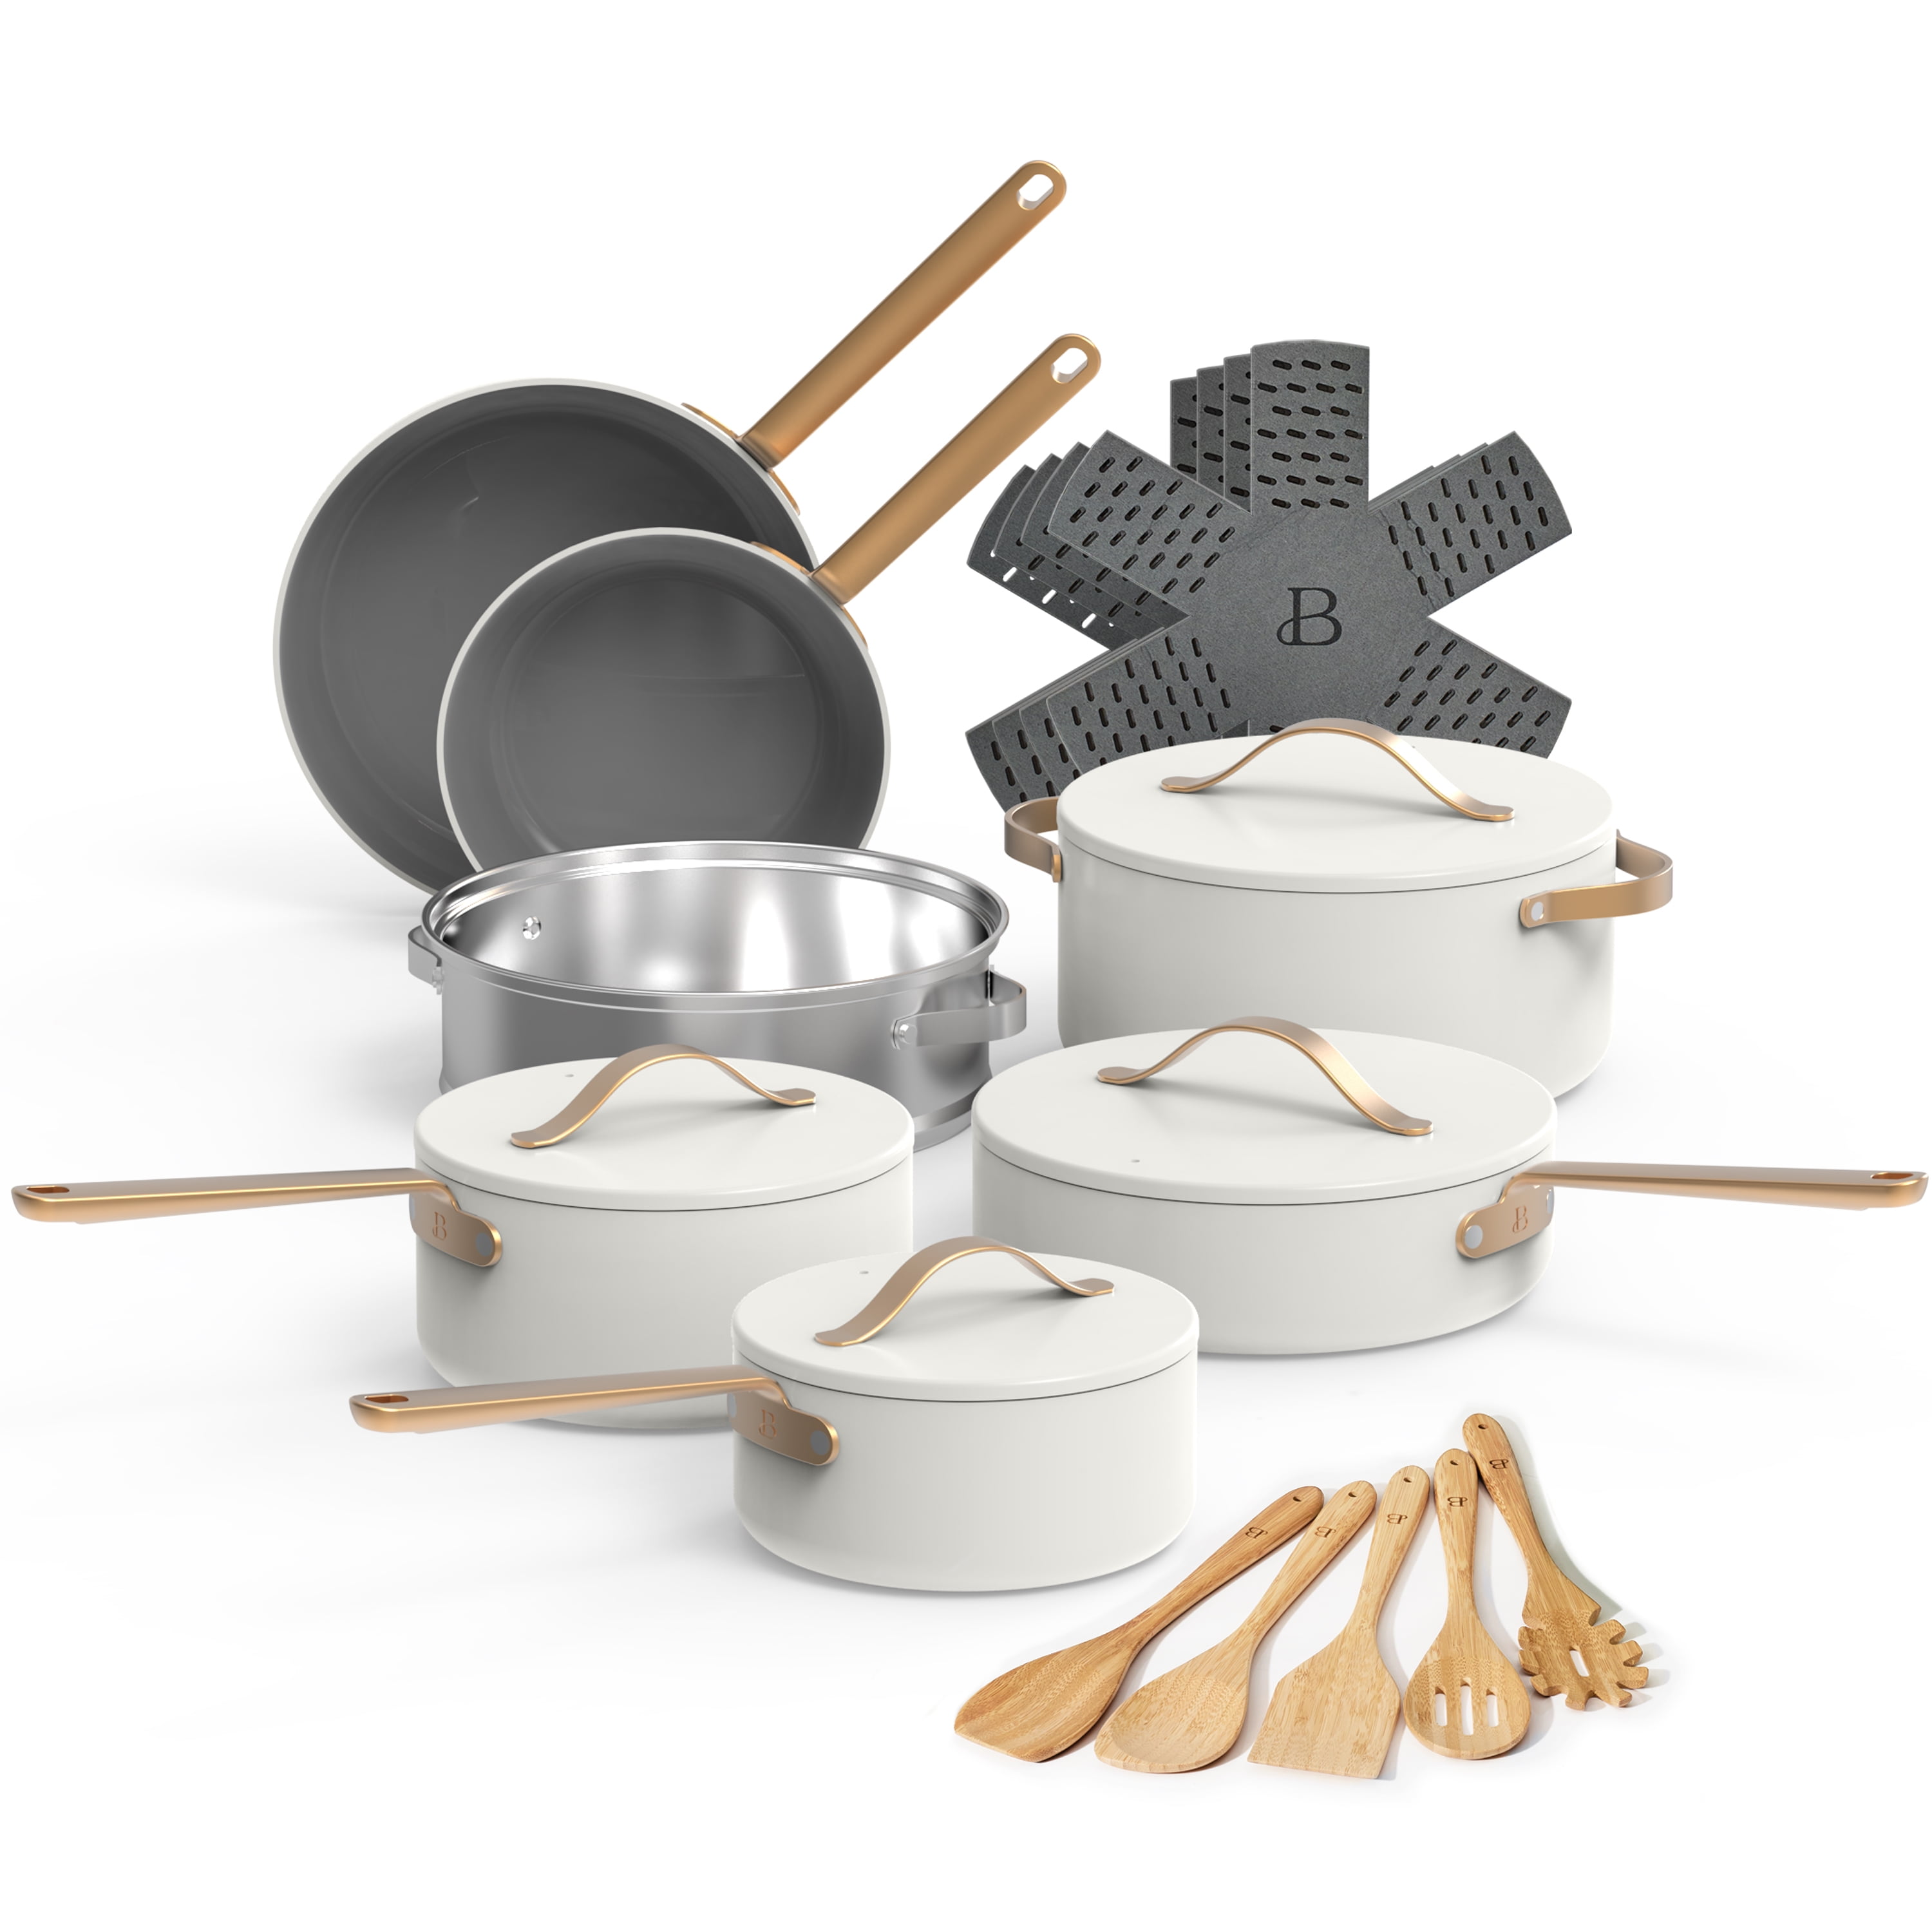 Beautiful 20pc Ceramic Non-Stick Cookware Set, White Icing by Drew